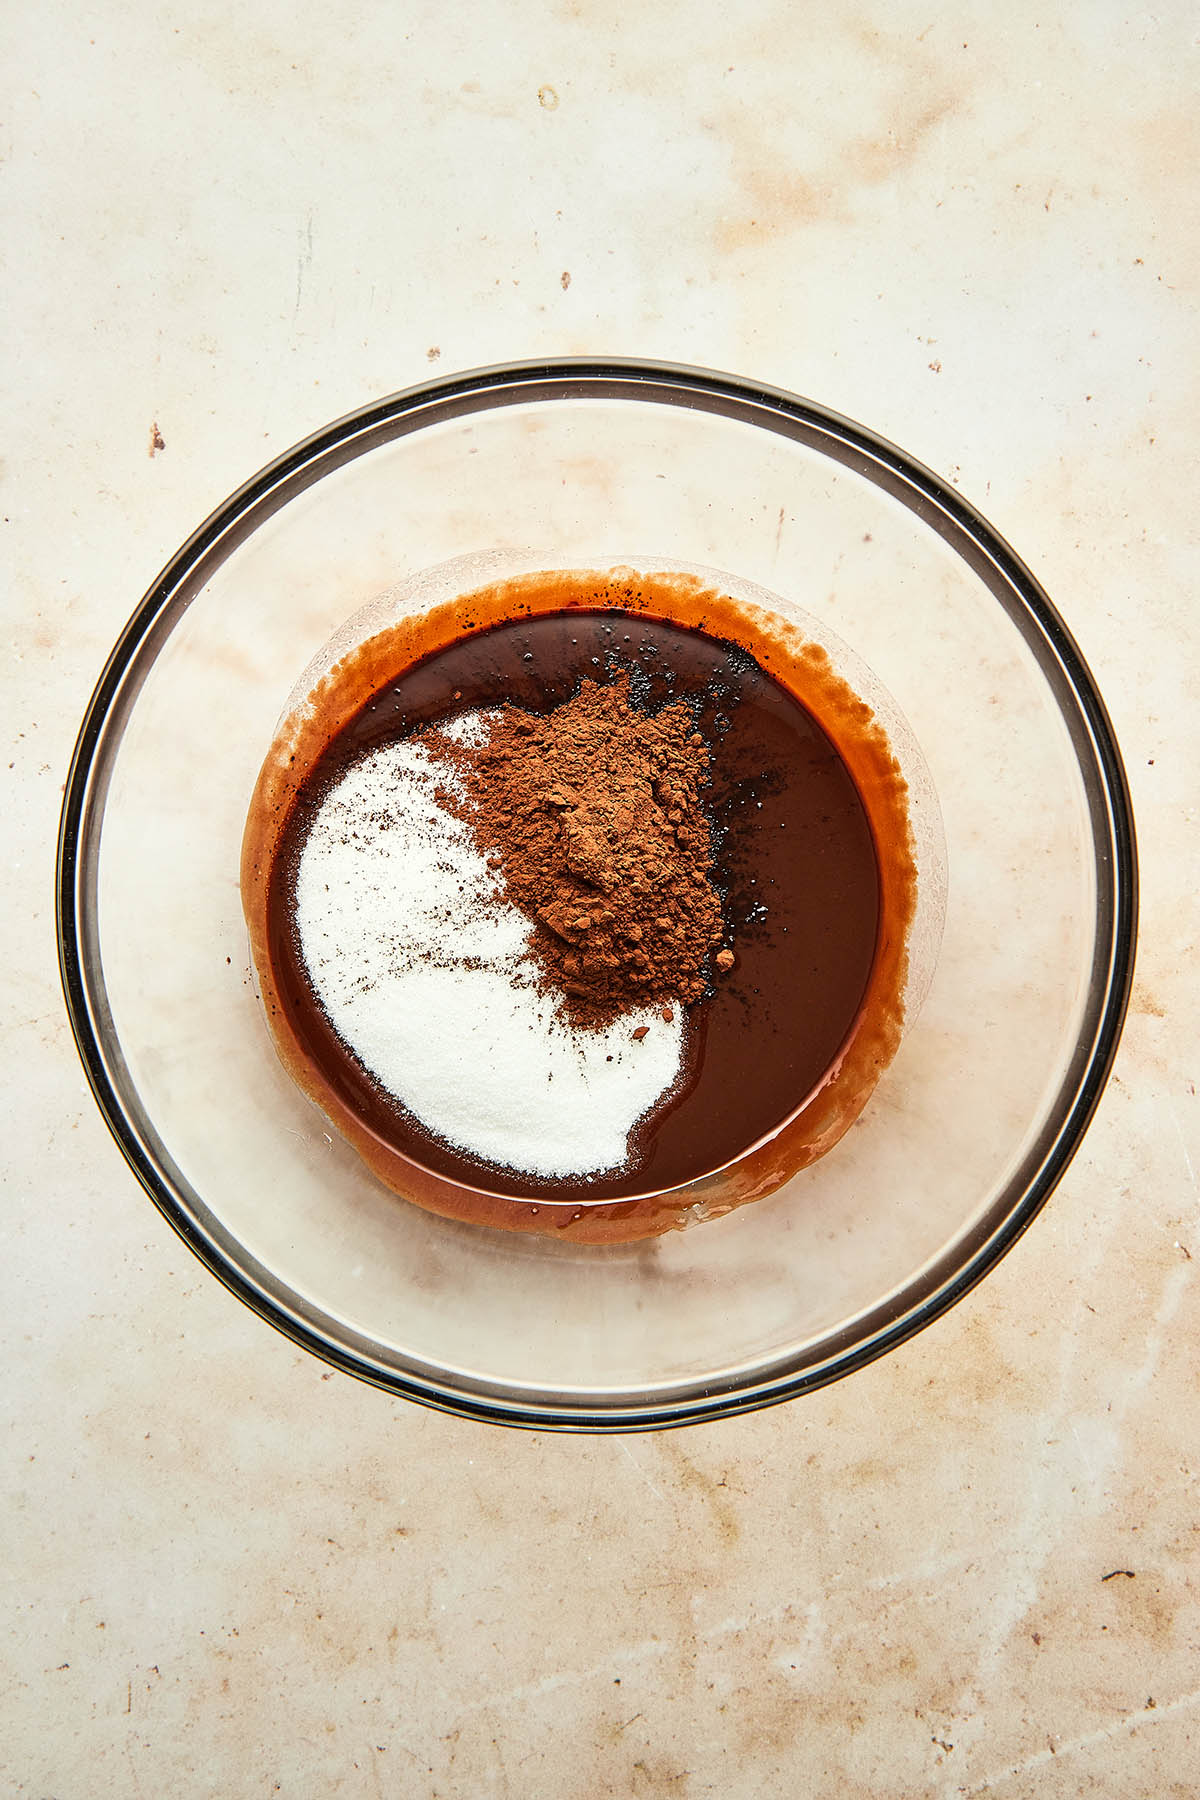 Melted chocolate, sugar, and cocoa in a large glass mixing bowl.